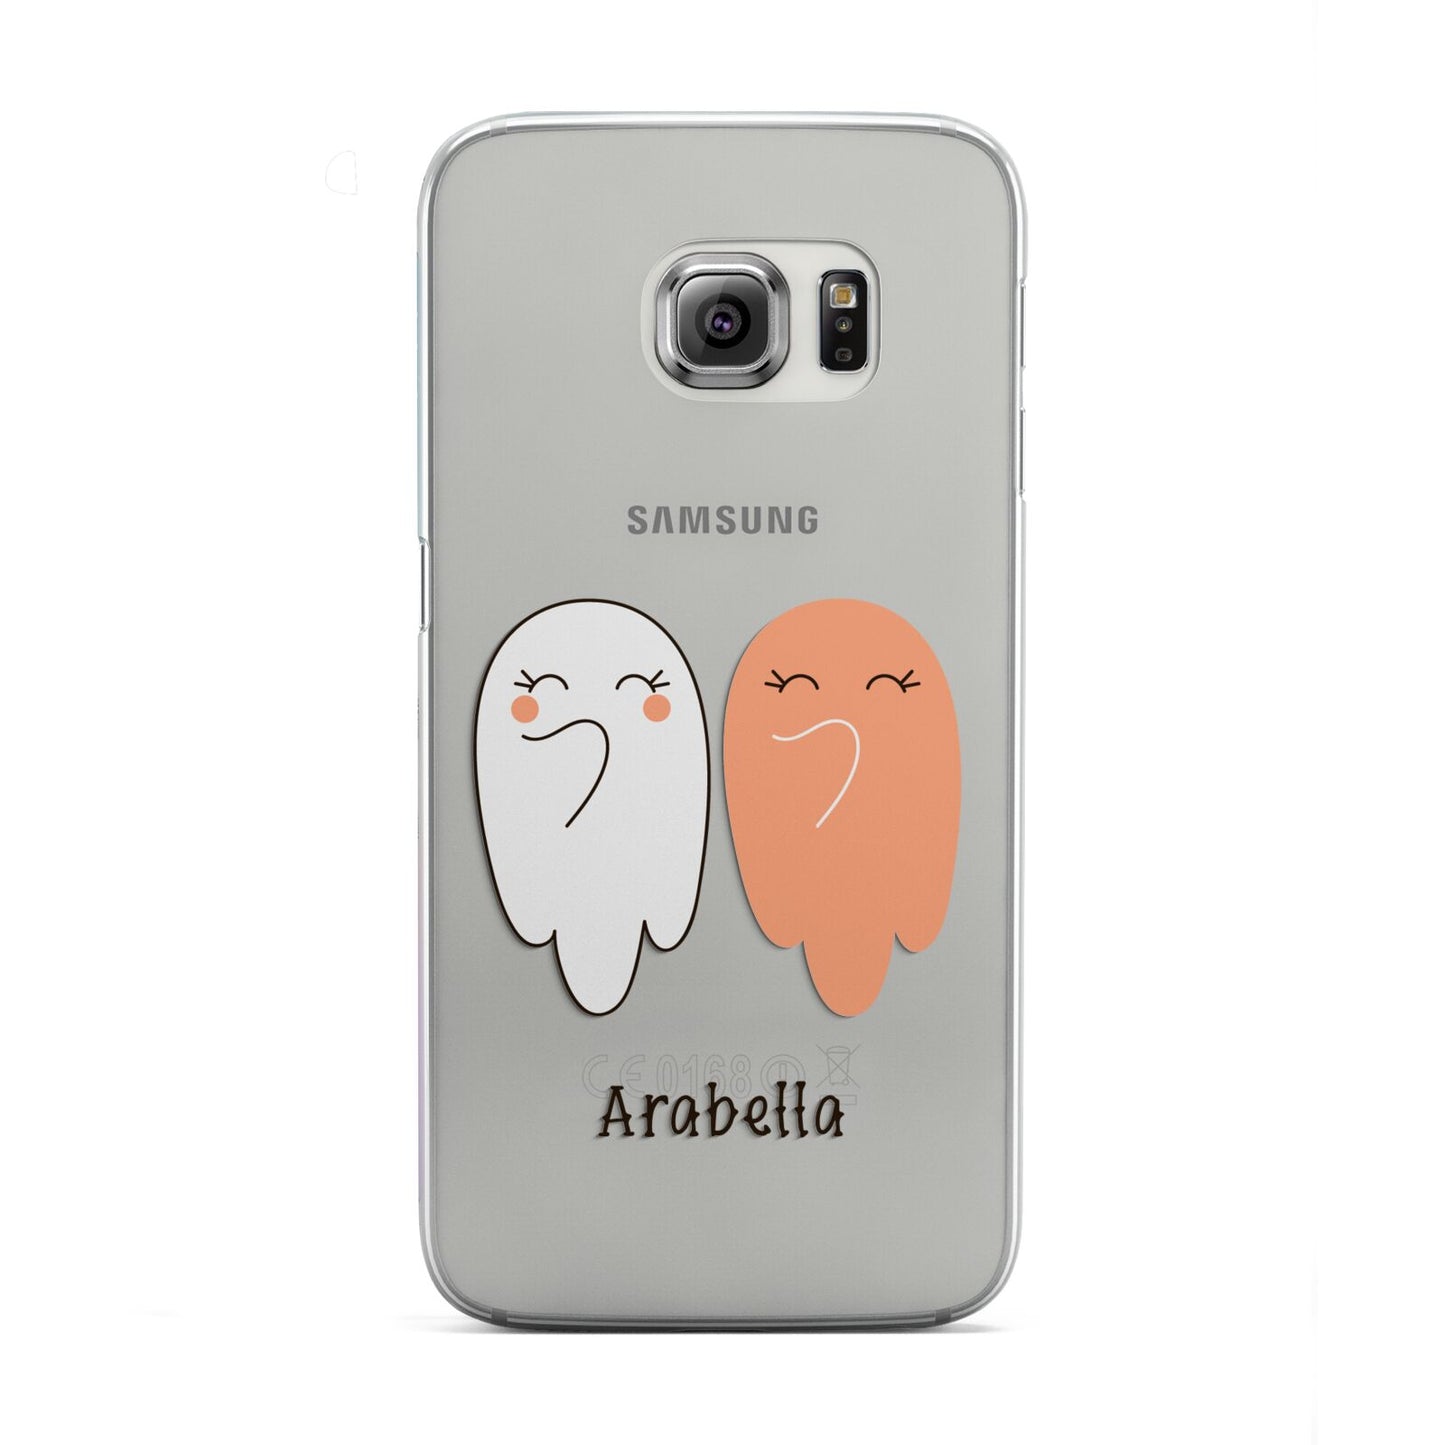 Two Ghosts Samsung Galaxy S6 Edge Case